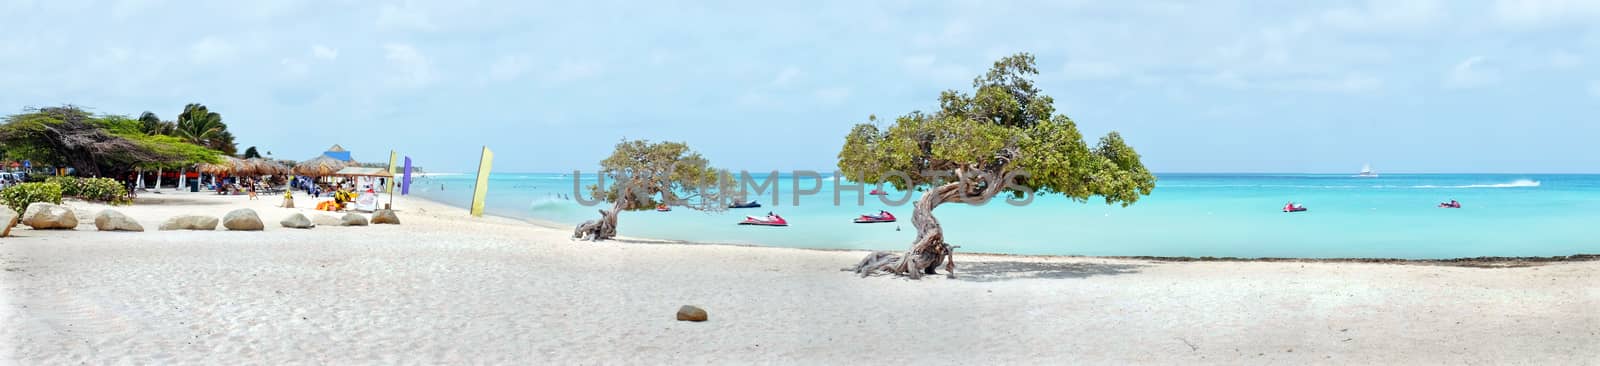 Panorama from eagle beach on Aruba island in the Caribbean sea by devy